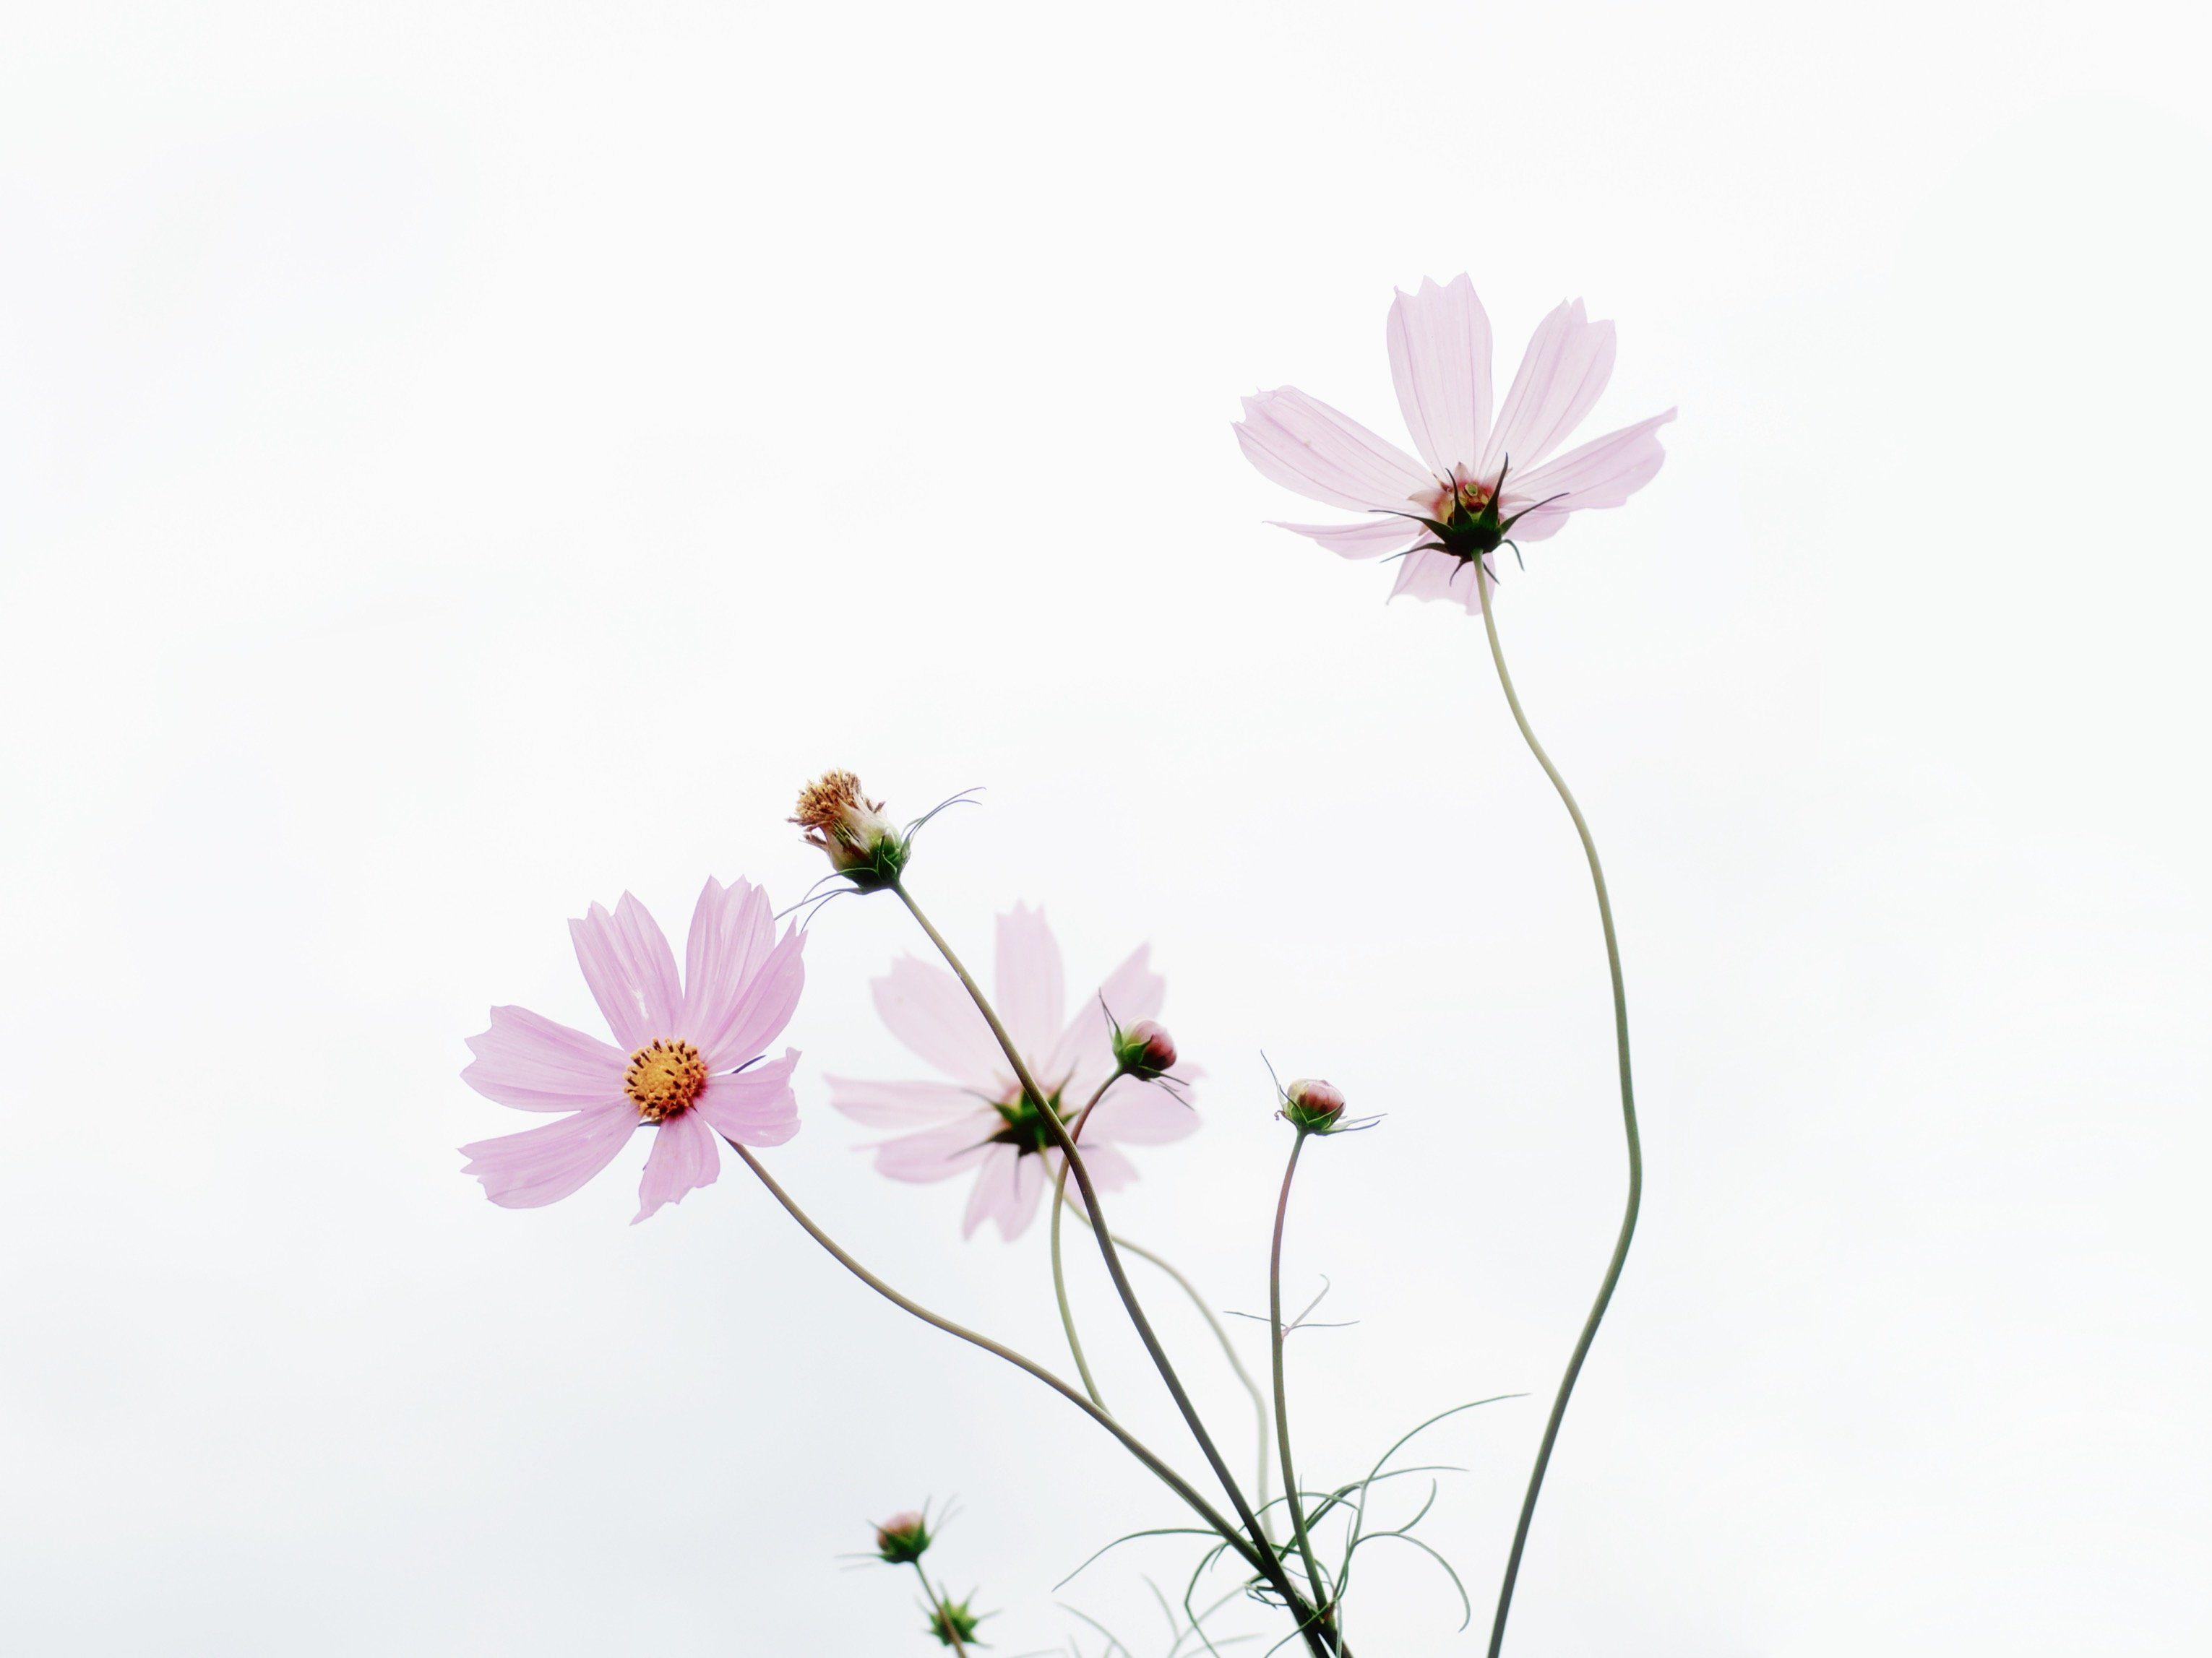 25 Incomparable minimalist aesthetic flower desktop wallpaper You Can ...